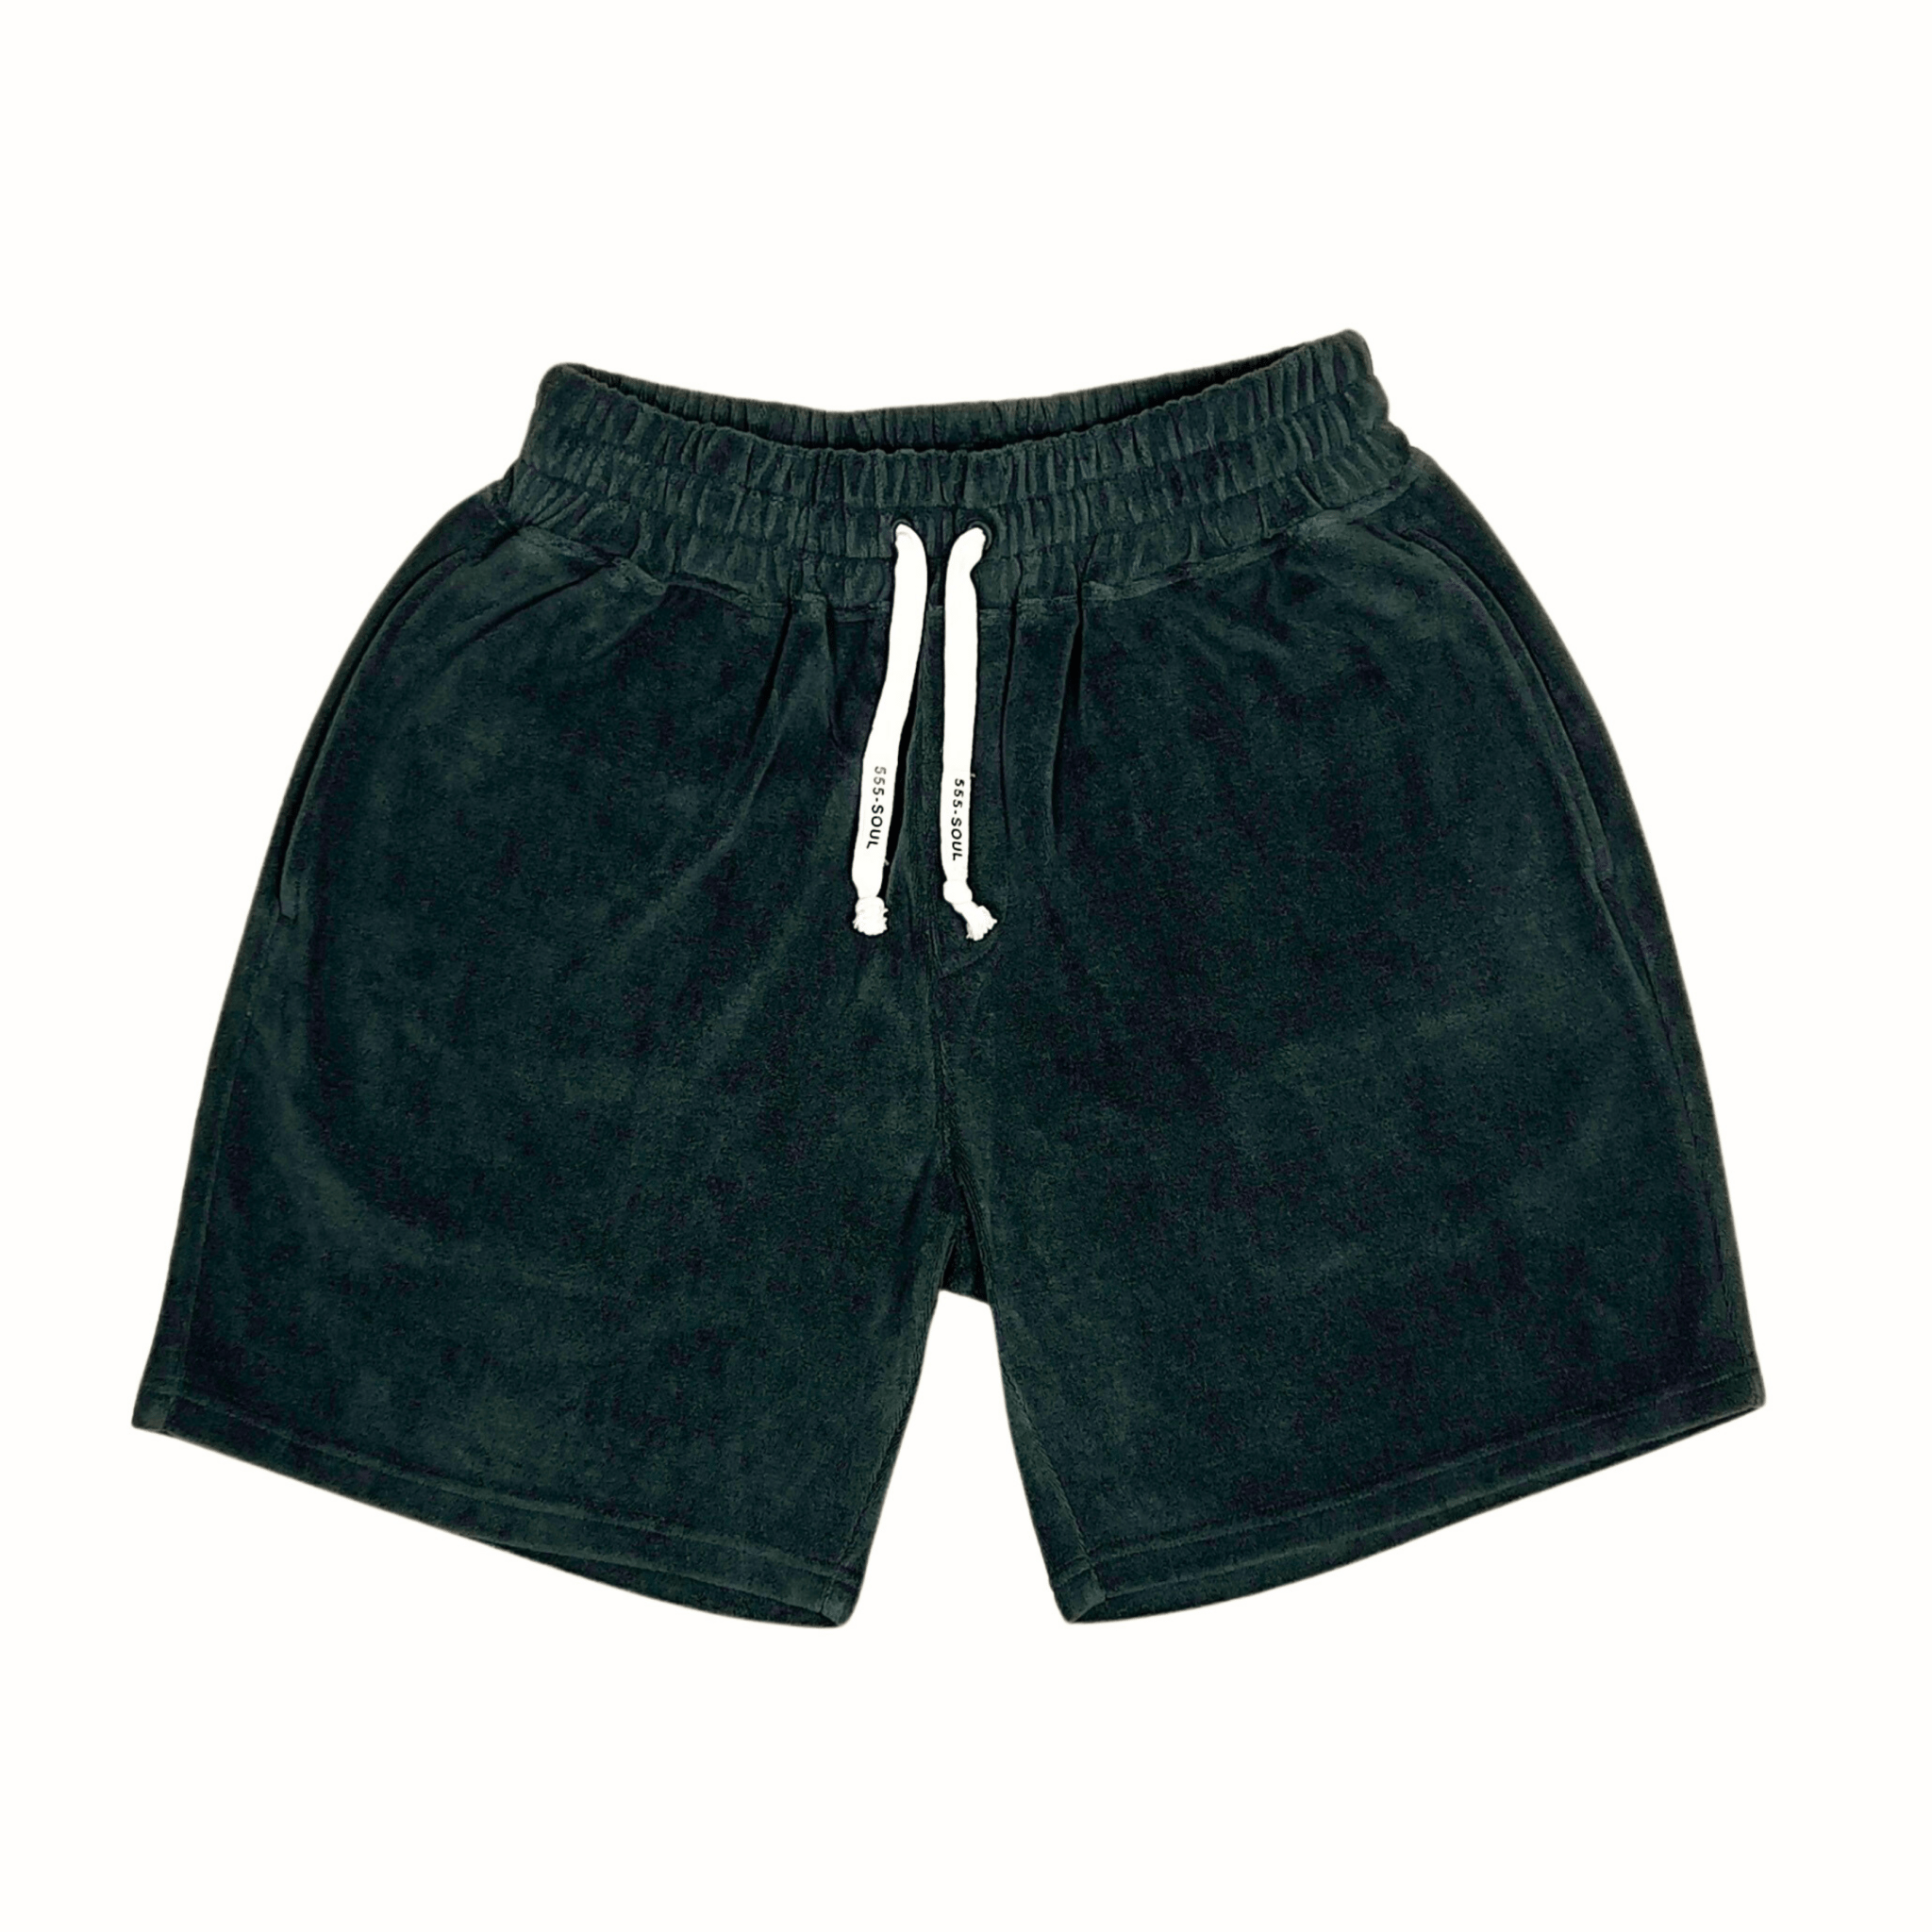 Classon Shorts in washed black